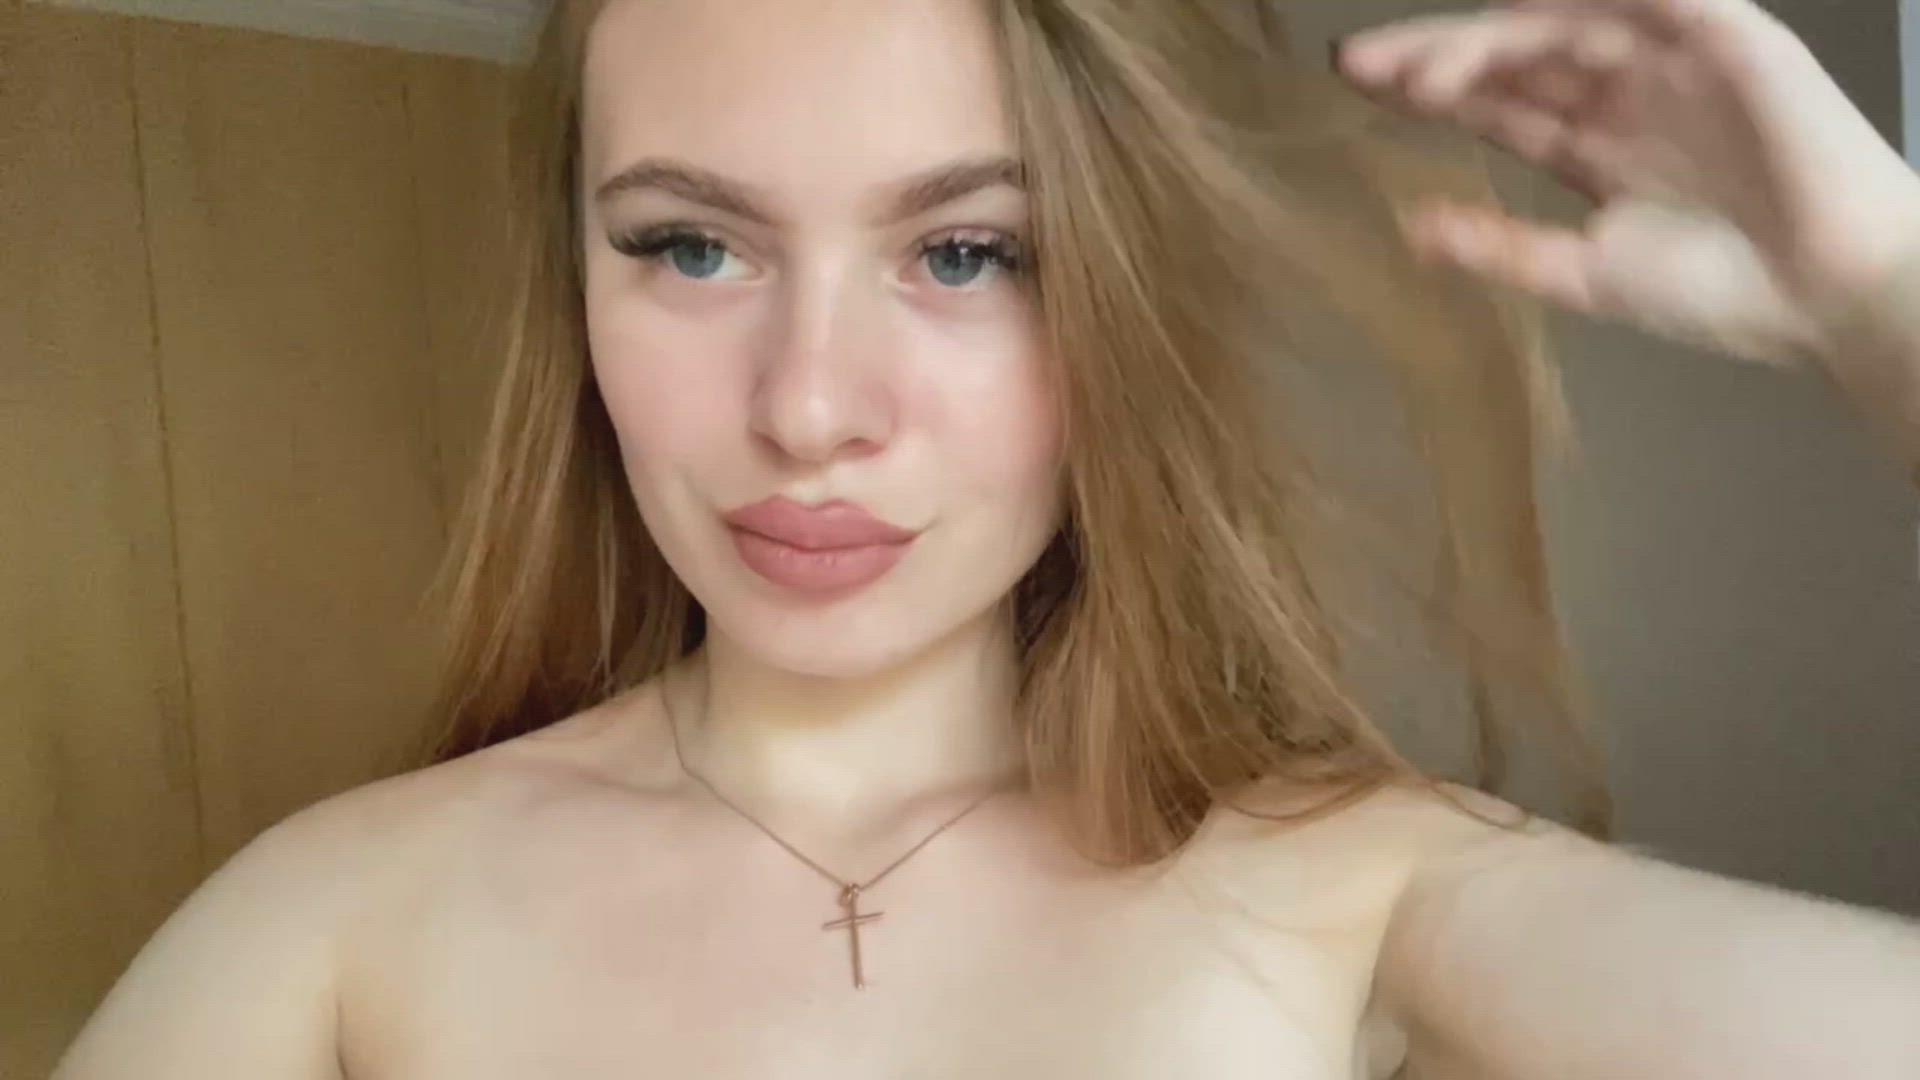 Tits porn video with onlyfans model Alice ❤️ <strong>@alice_love_18</strong>